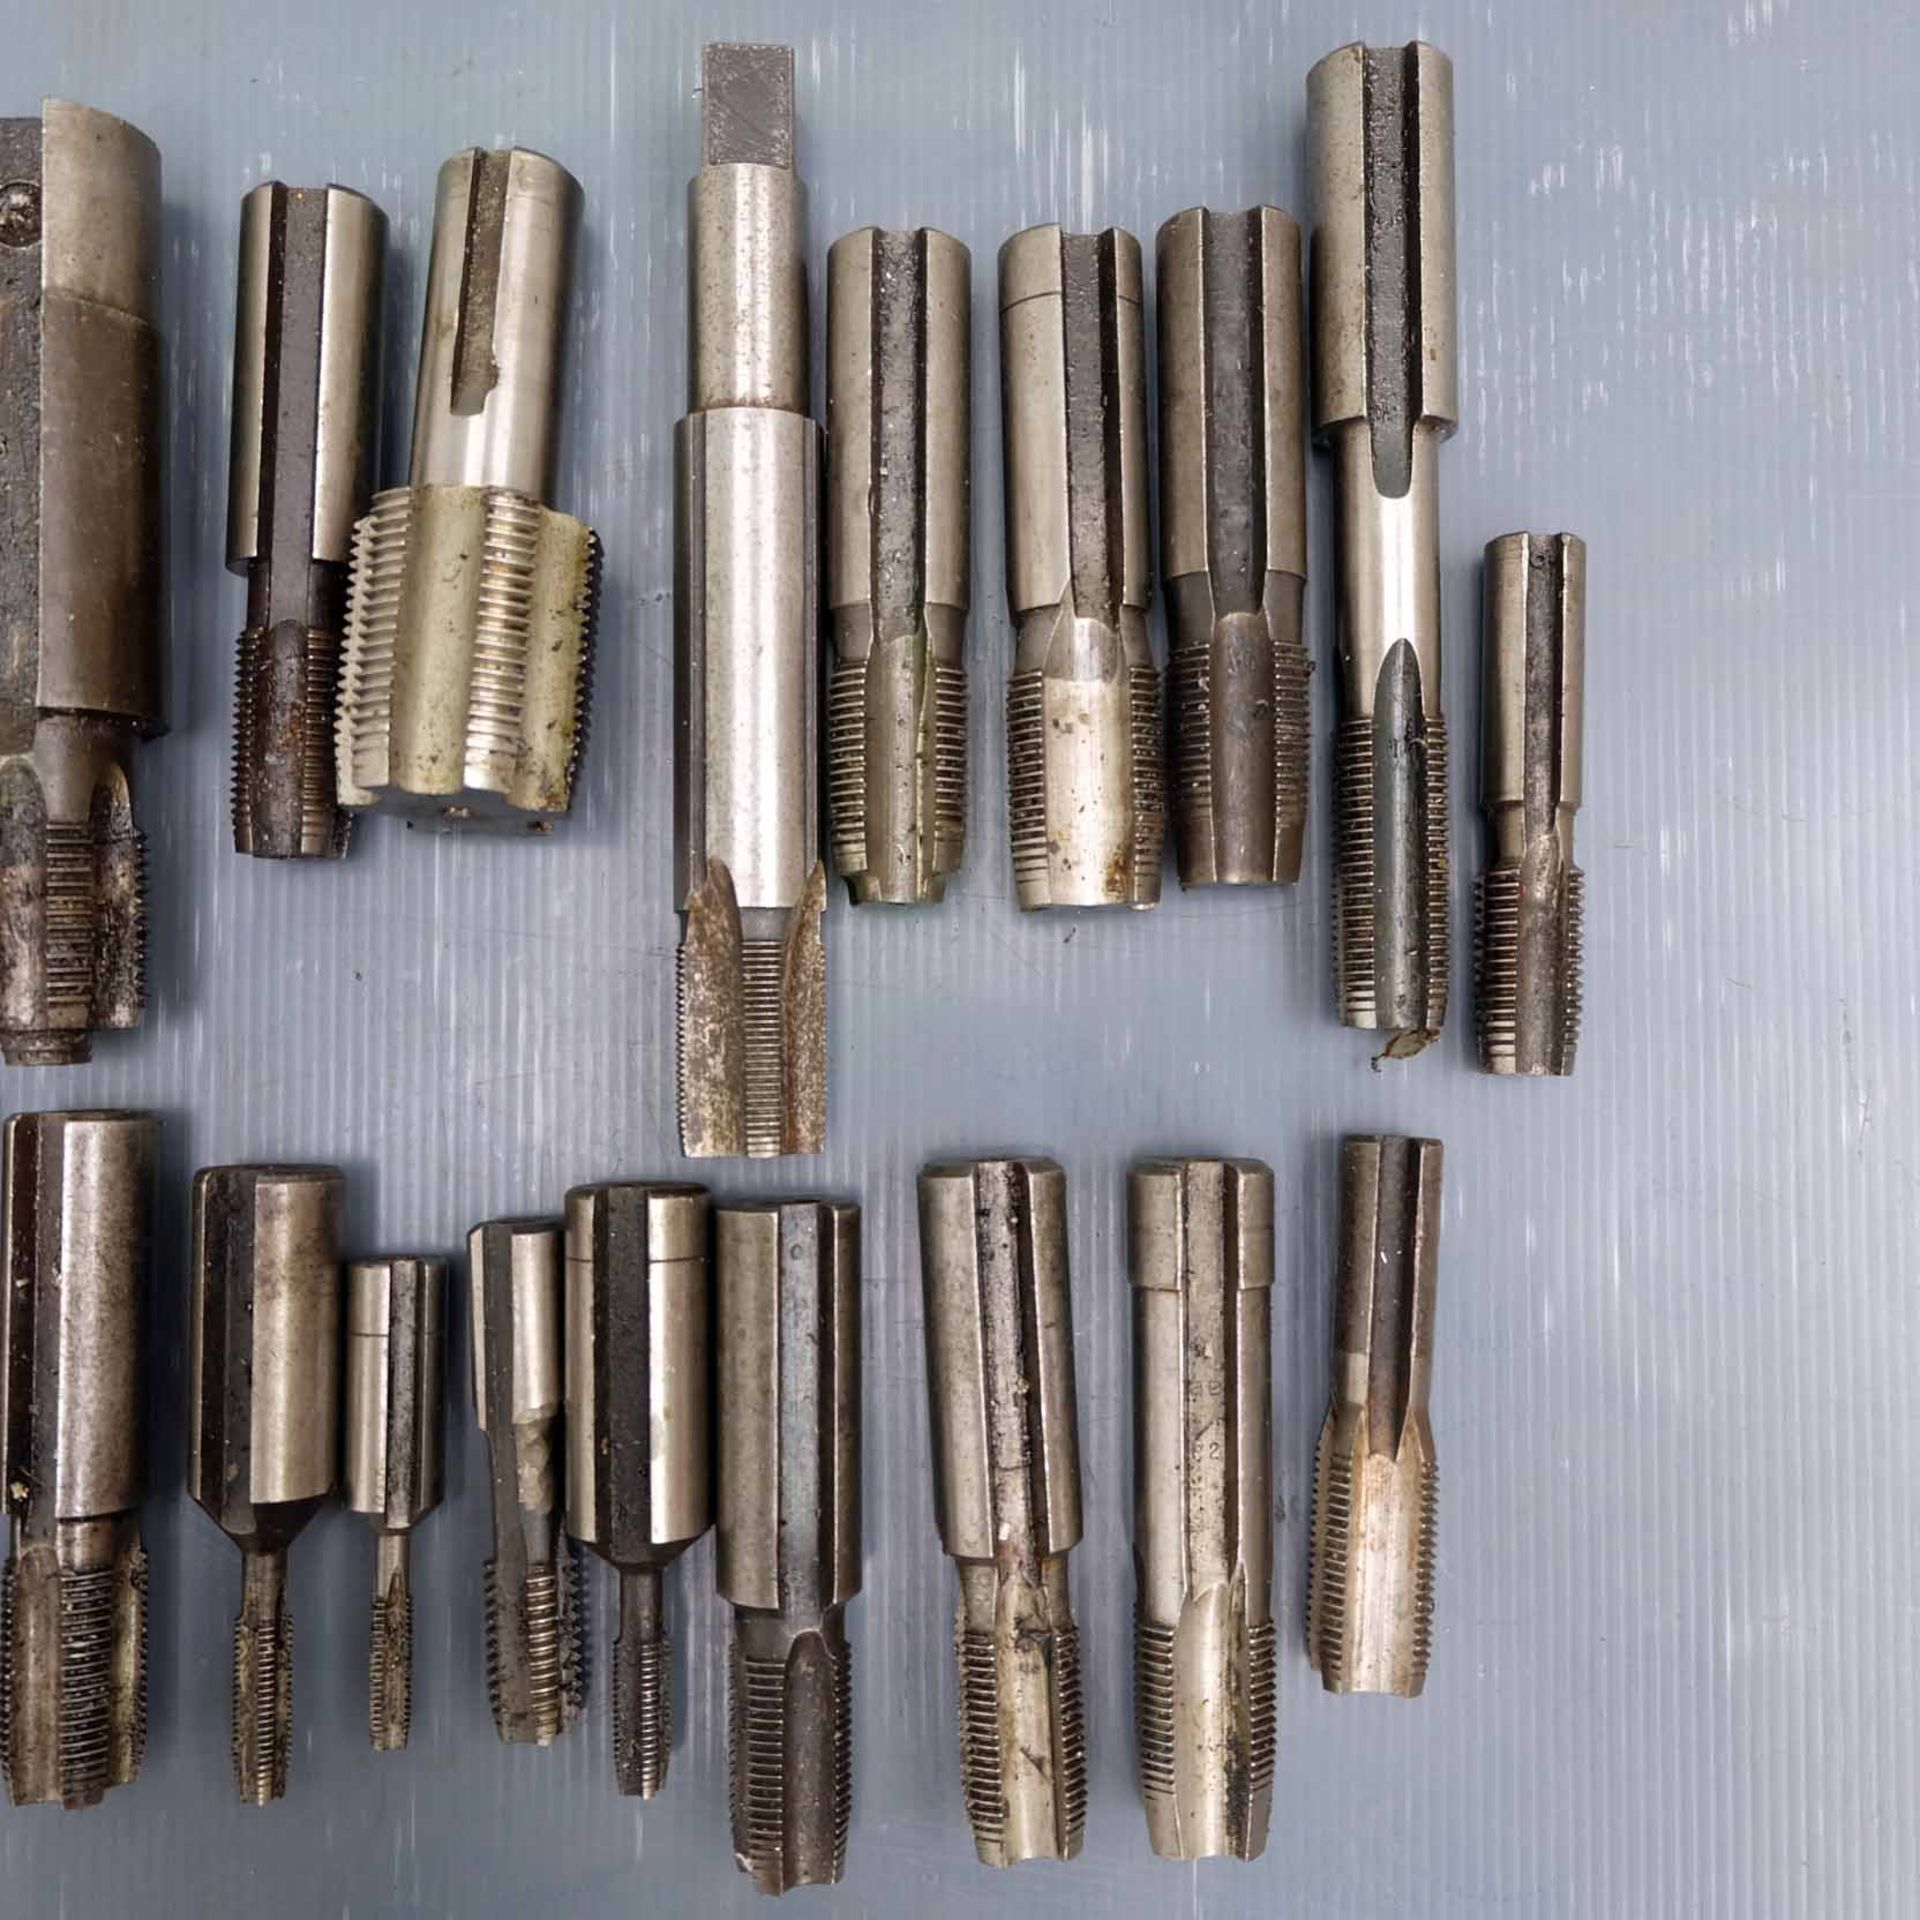 Quantity of Slotted Shank Fitting Taps. Various Sizes. - Image 4 of 4